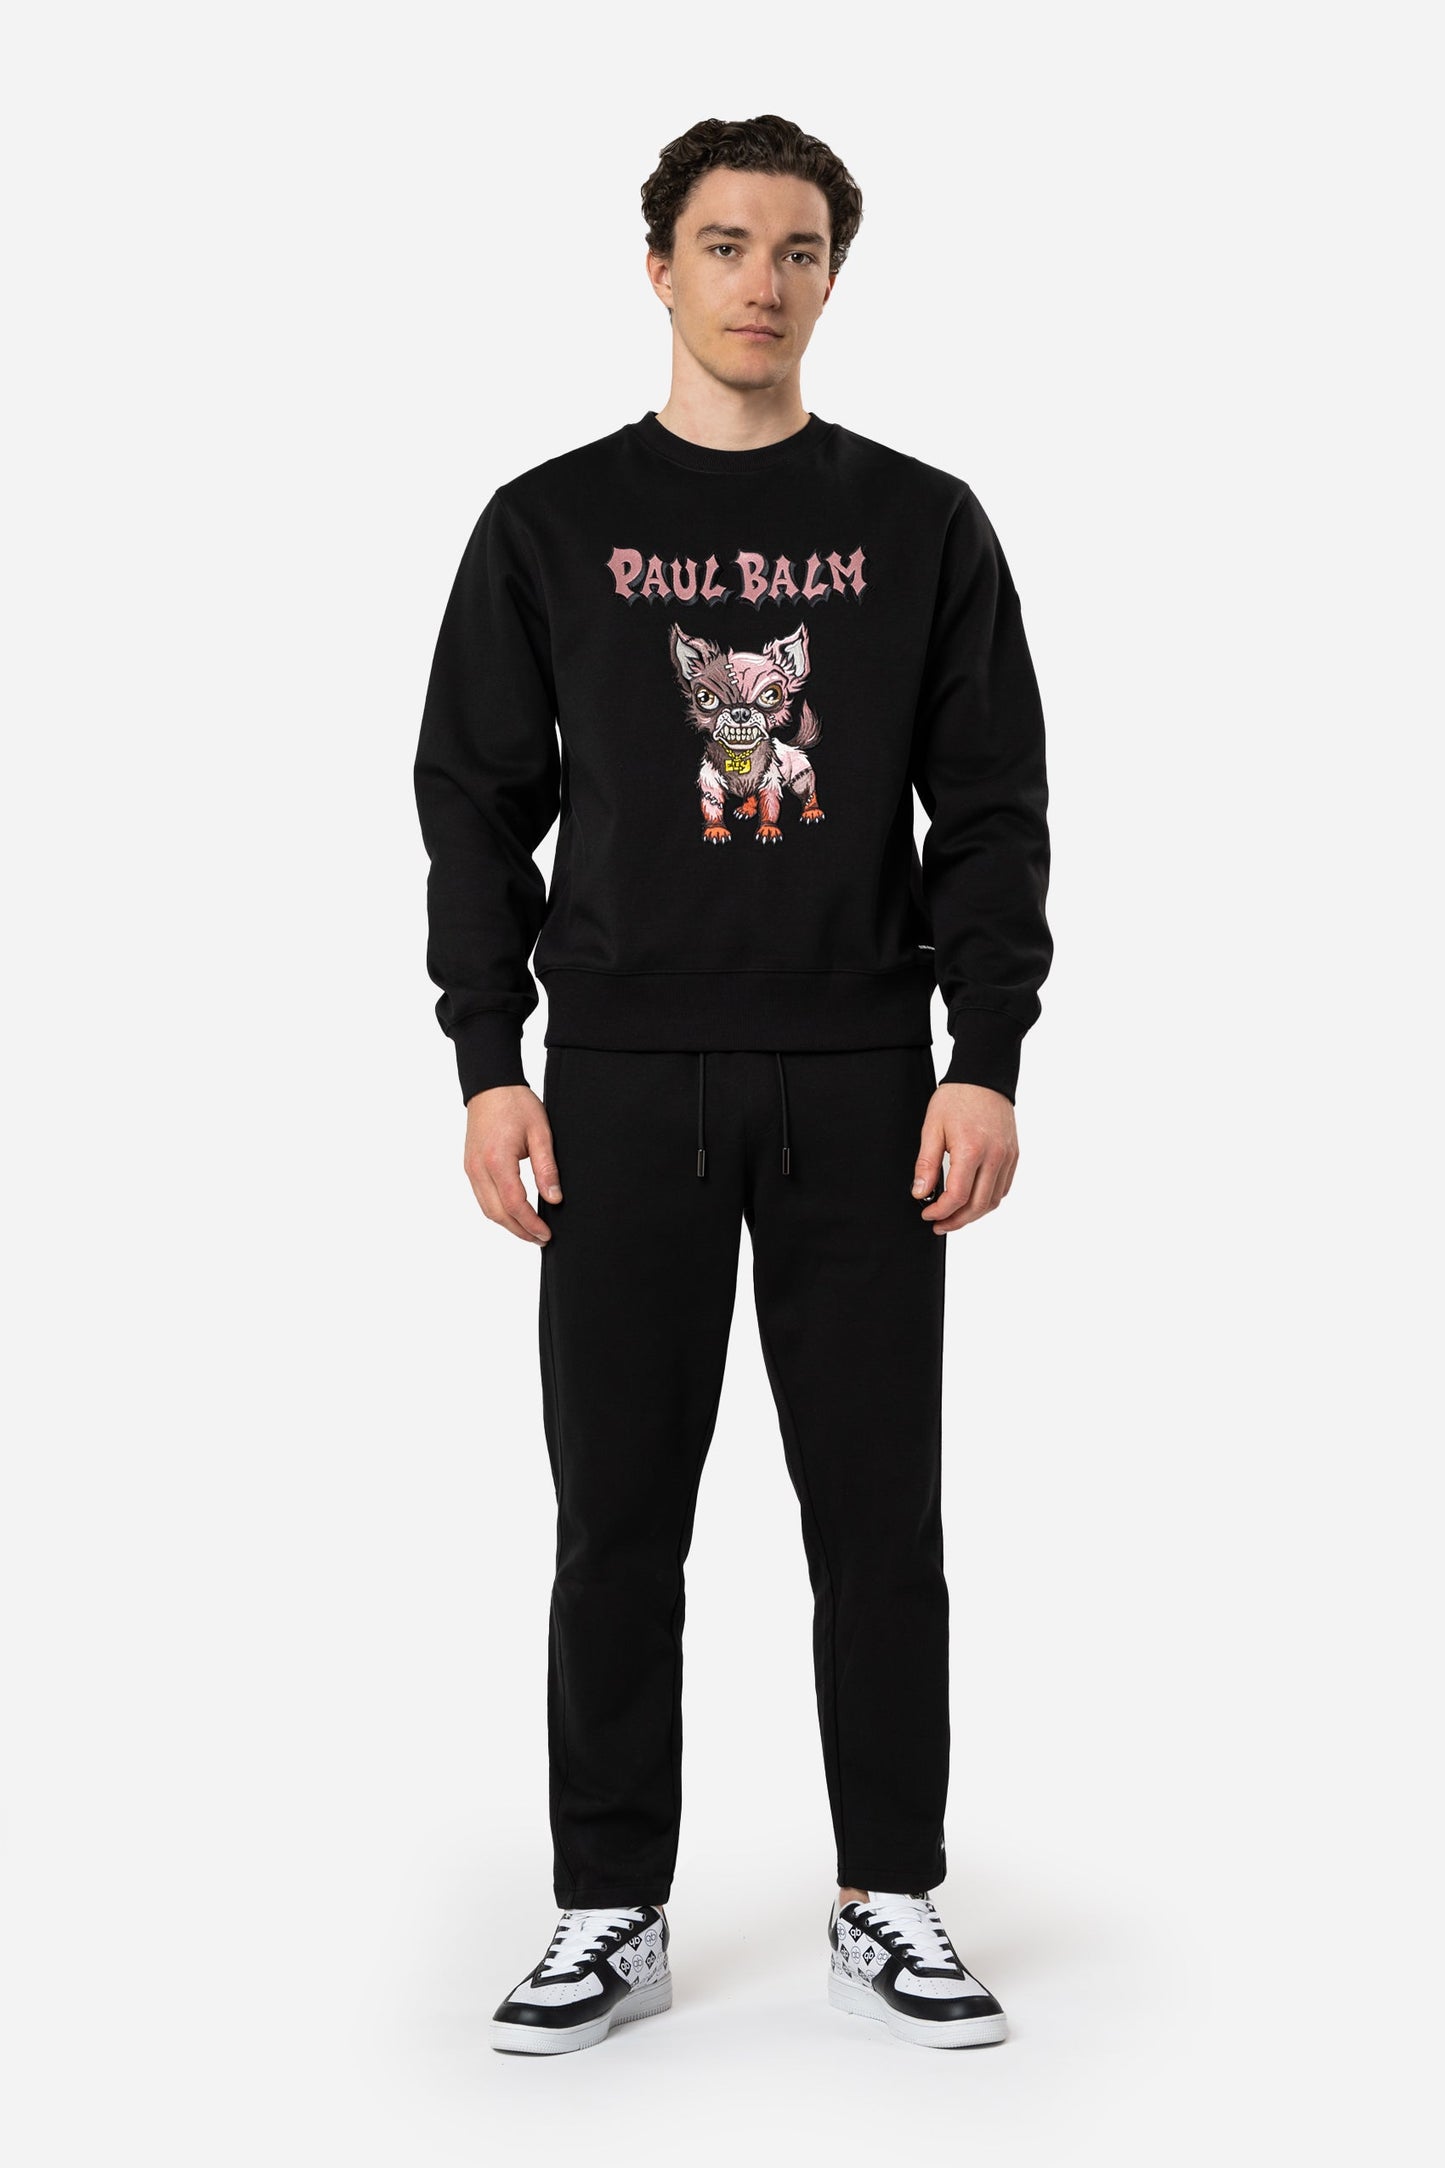 Paul Balm: Elly angry Embroidery Sweatshirt - Limited to 300